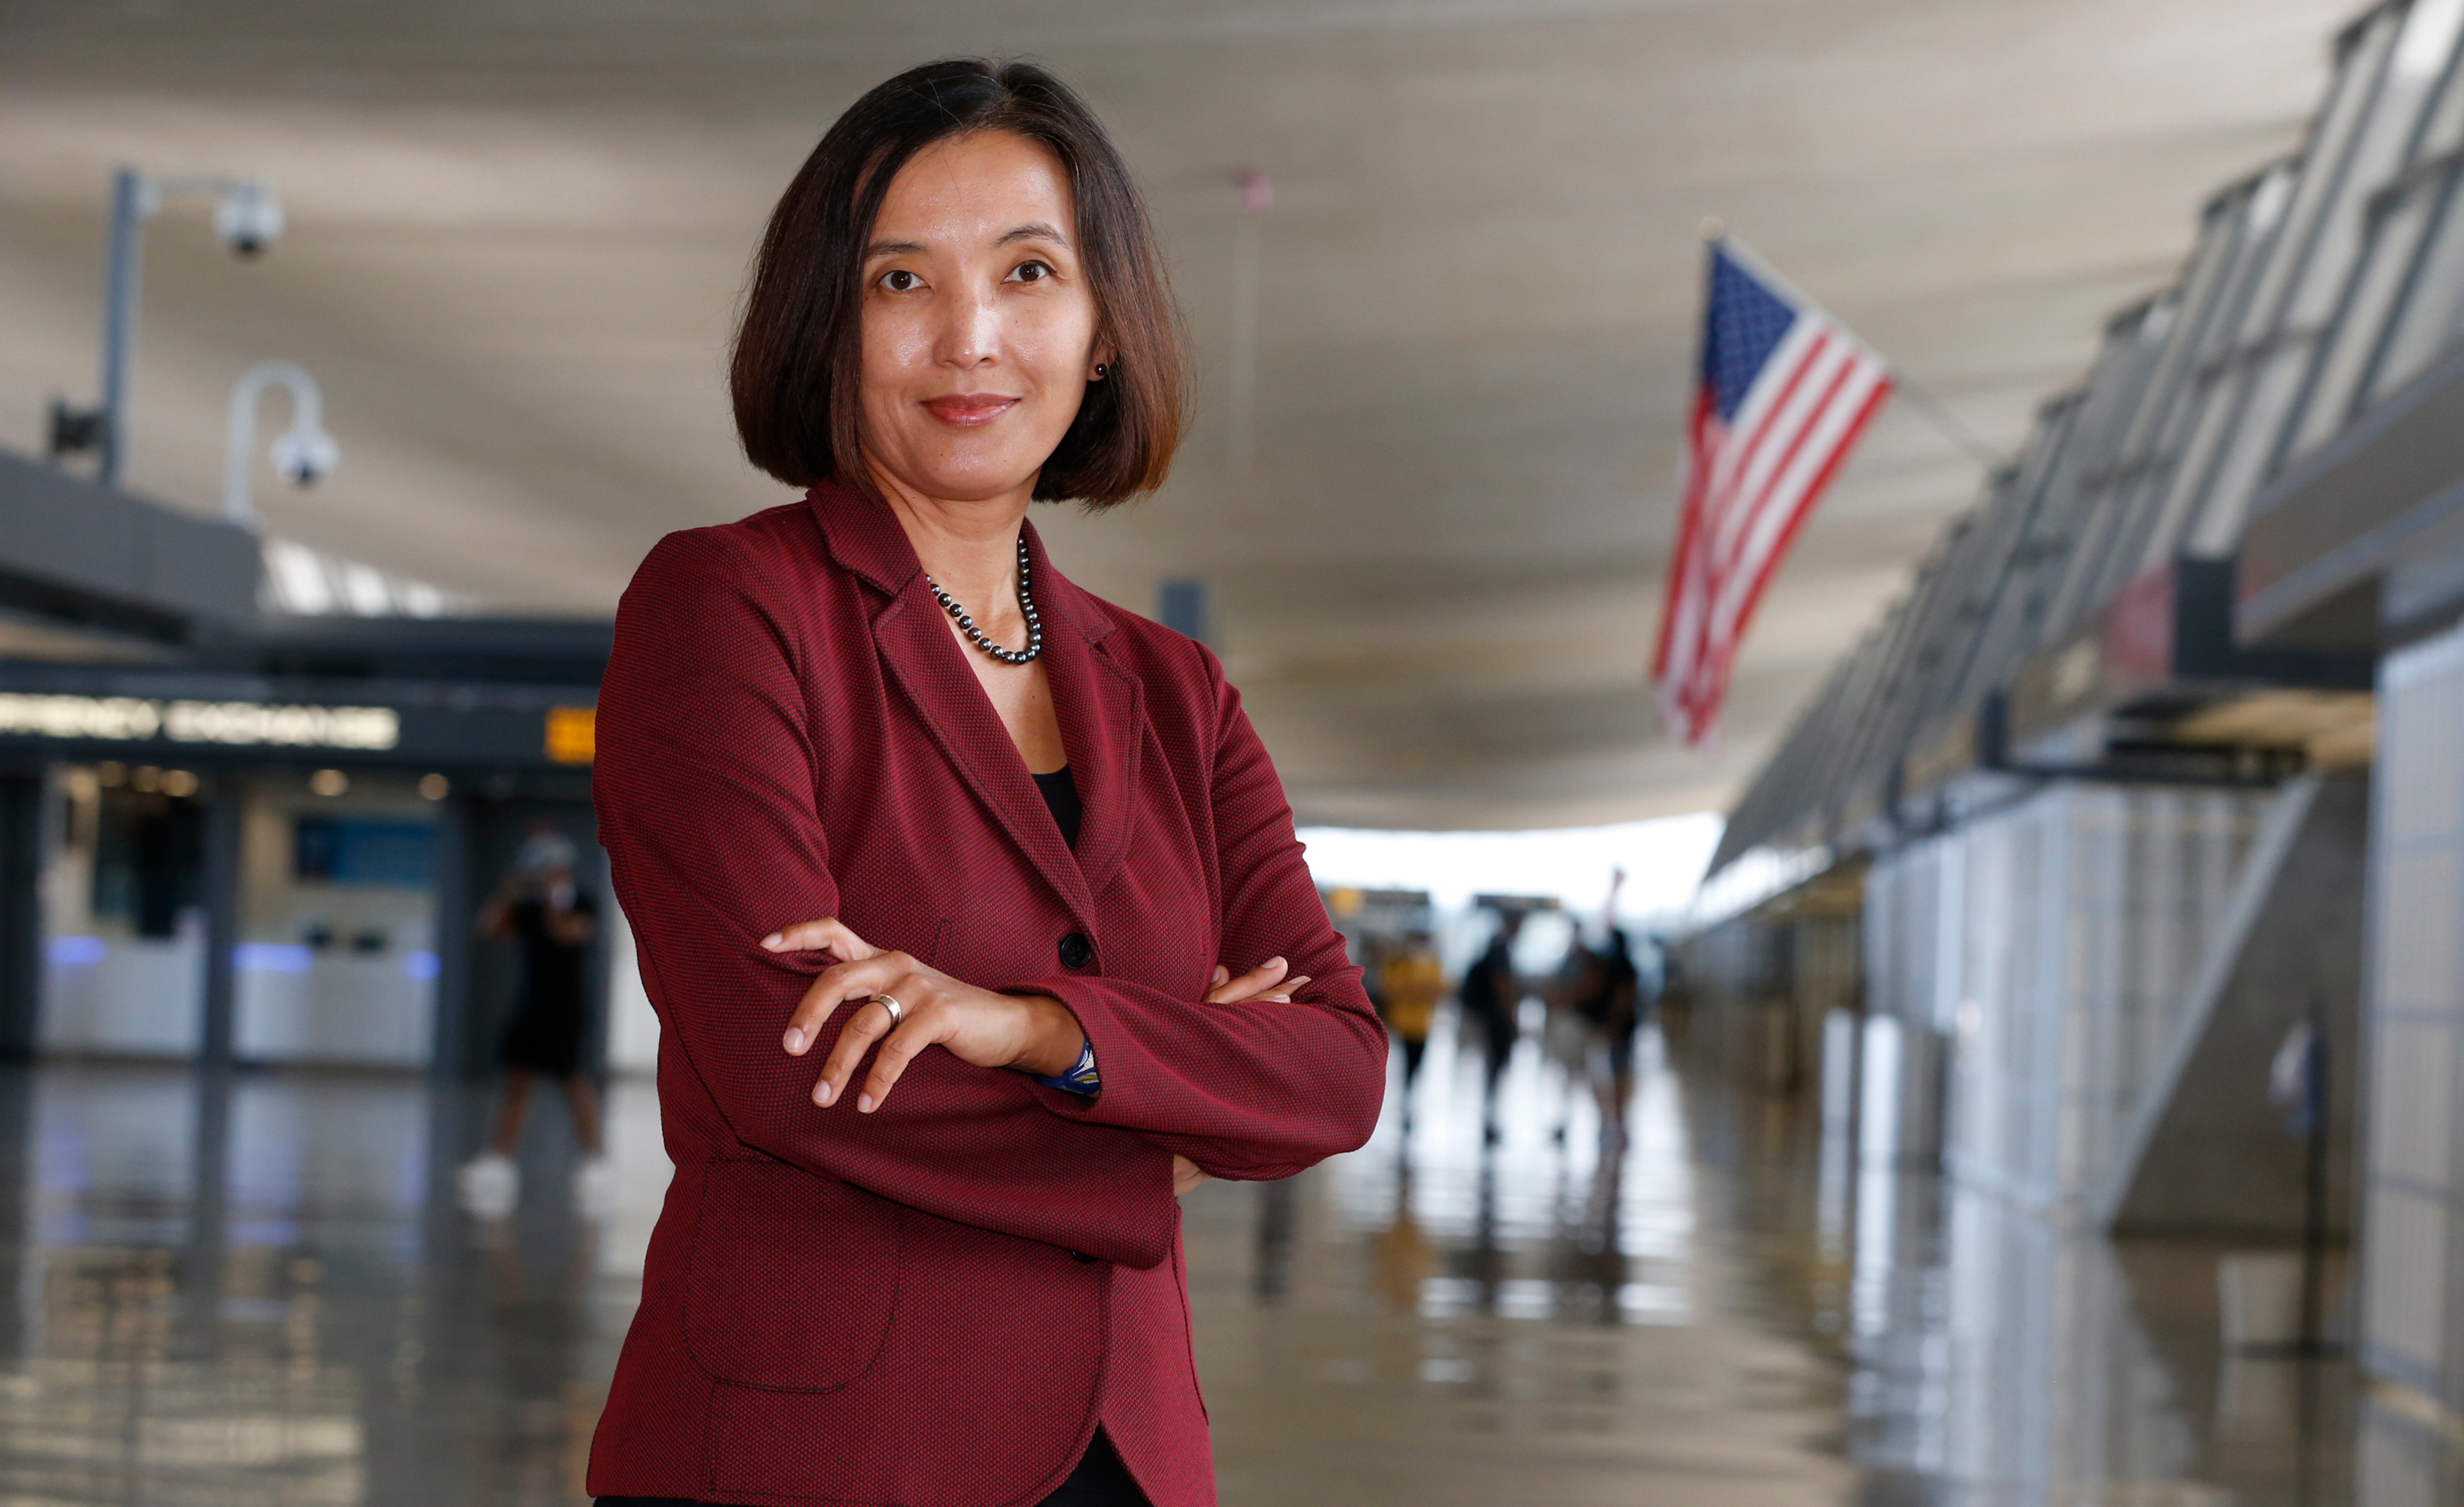 Wilder School faculty member Saltanat ‘Salta’ Liebert has received a contract for $114,832 from the Office of New Americans at the Virginia Department of Social Services (VDSS) to conduct a needs assessment to identify barriers to the integration of immigrants in Virginia.